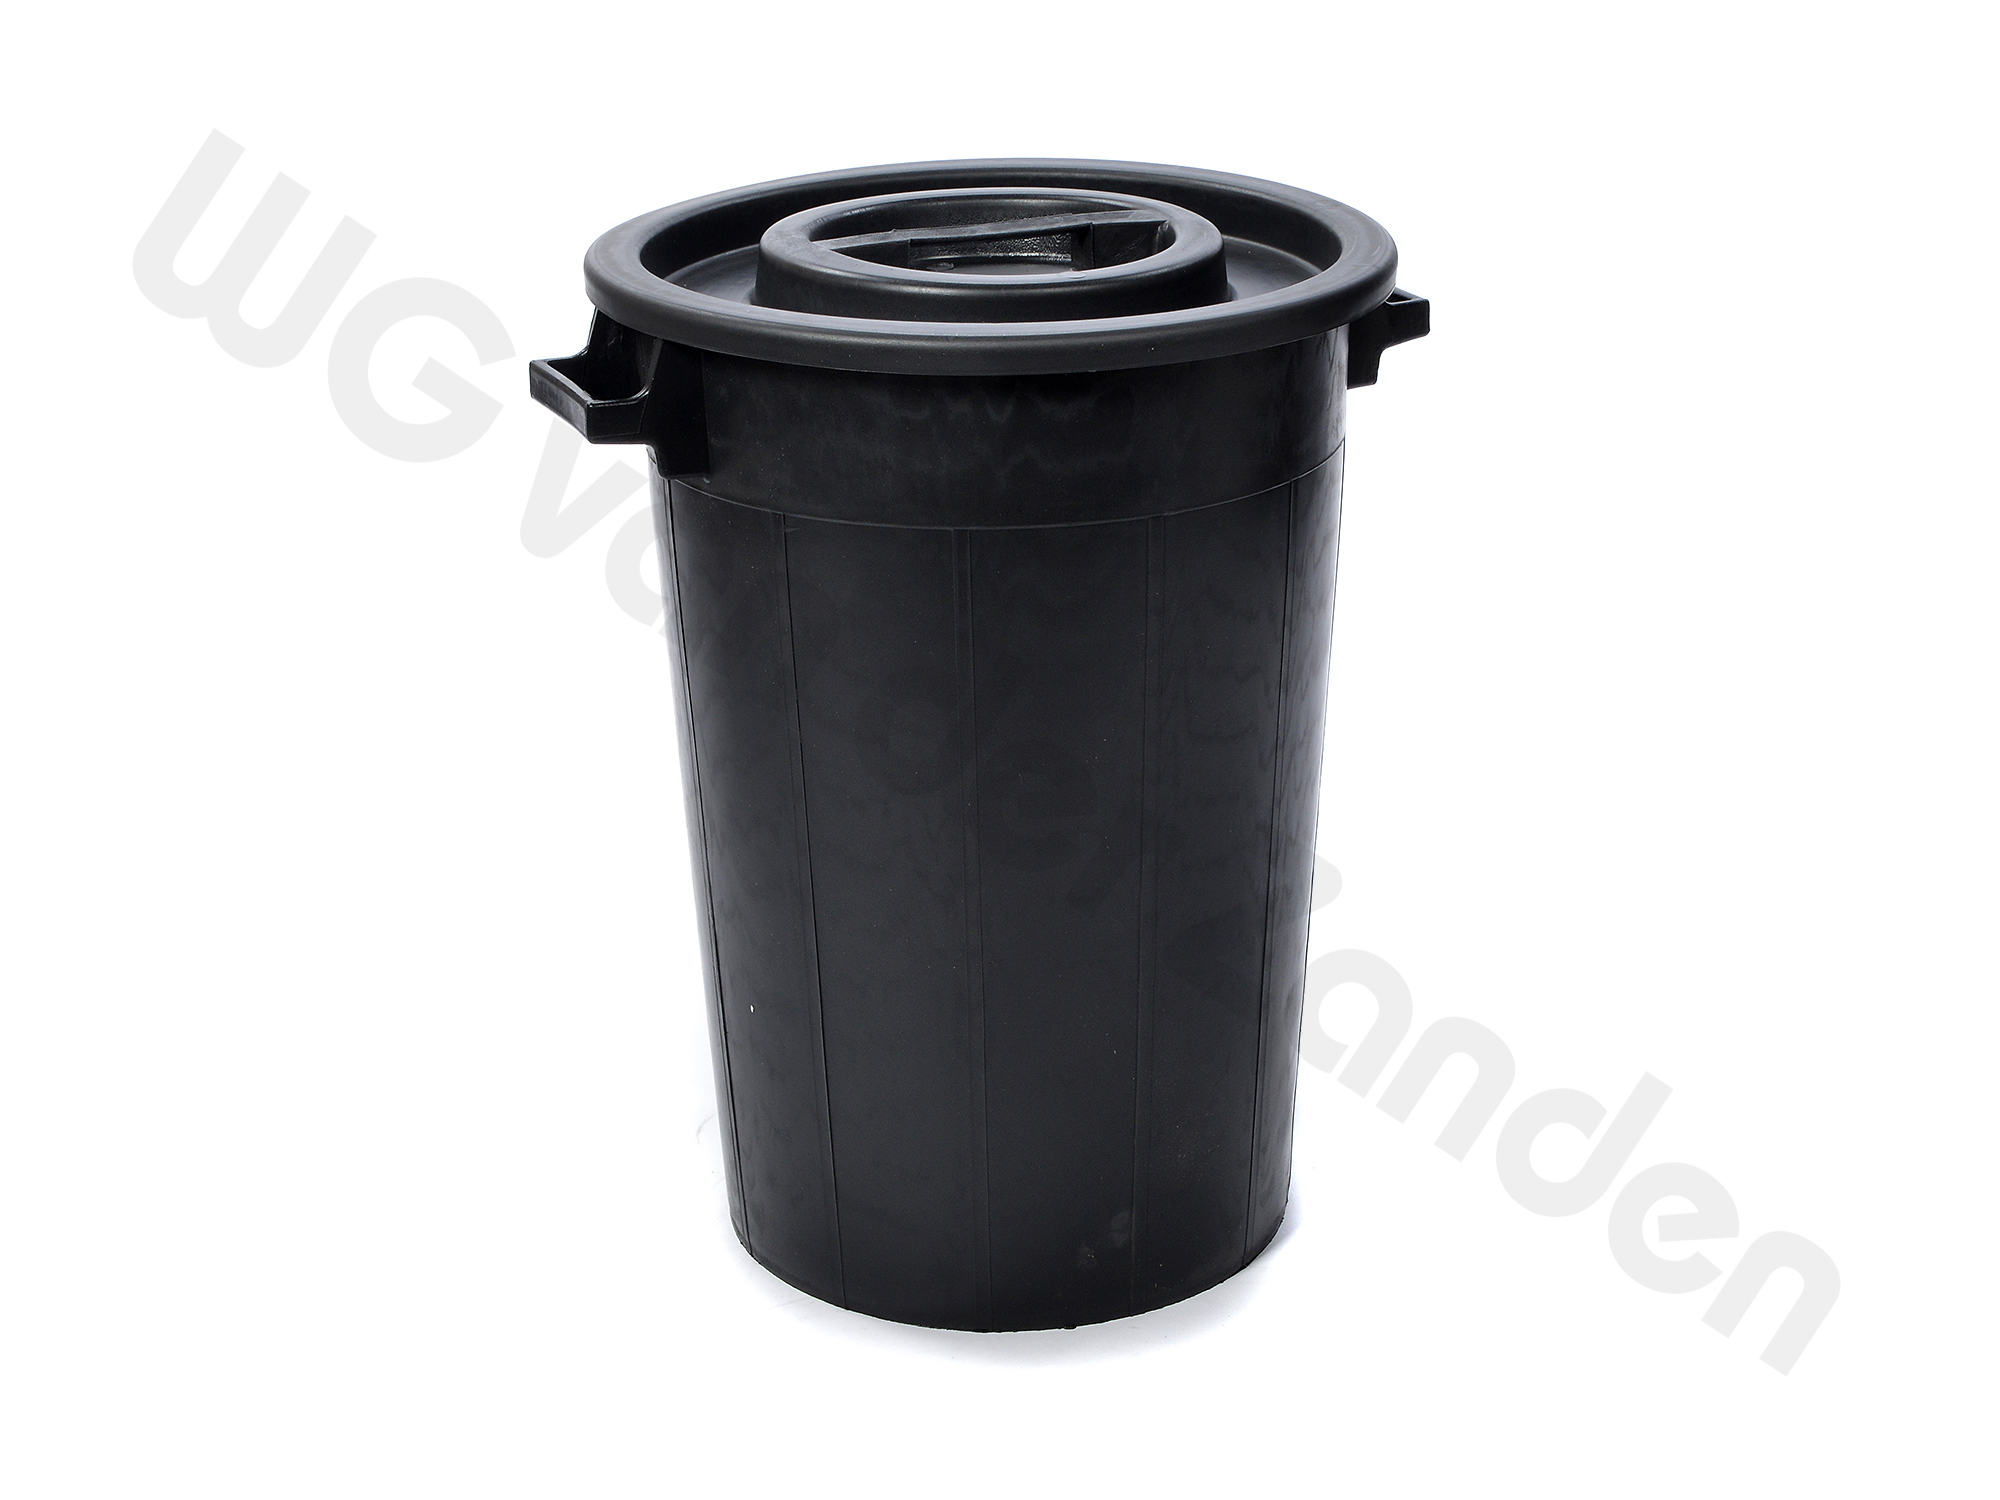 440034 GARBAGE BIN PLASTIC 75 LTR ROUND WITH COVER BLACK